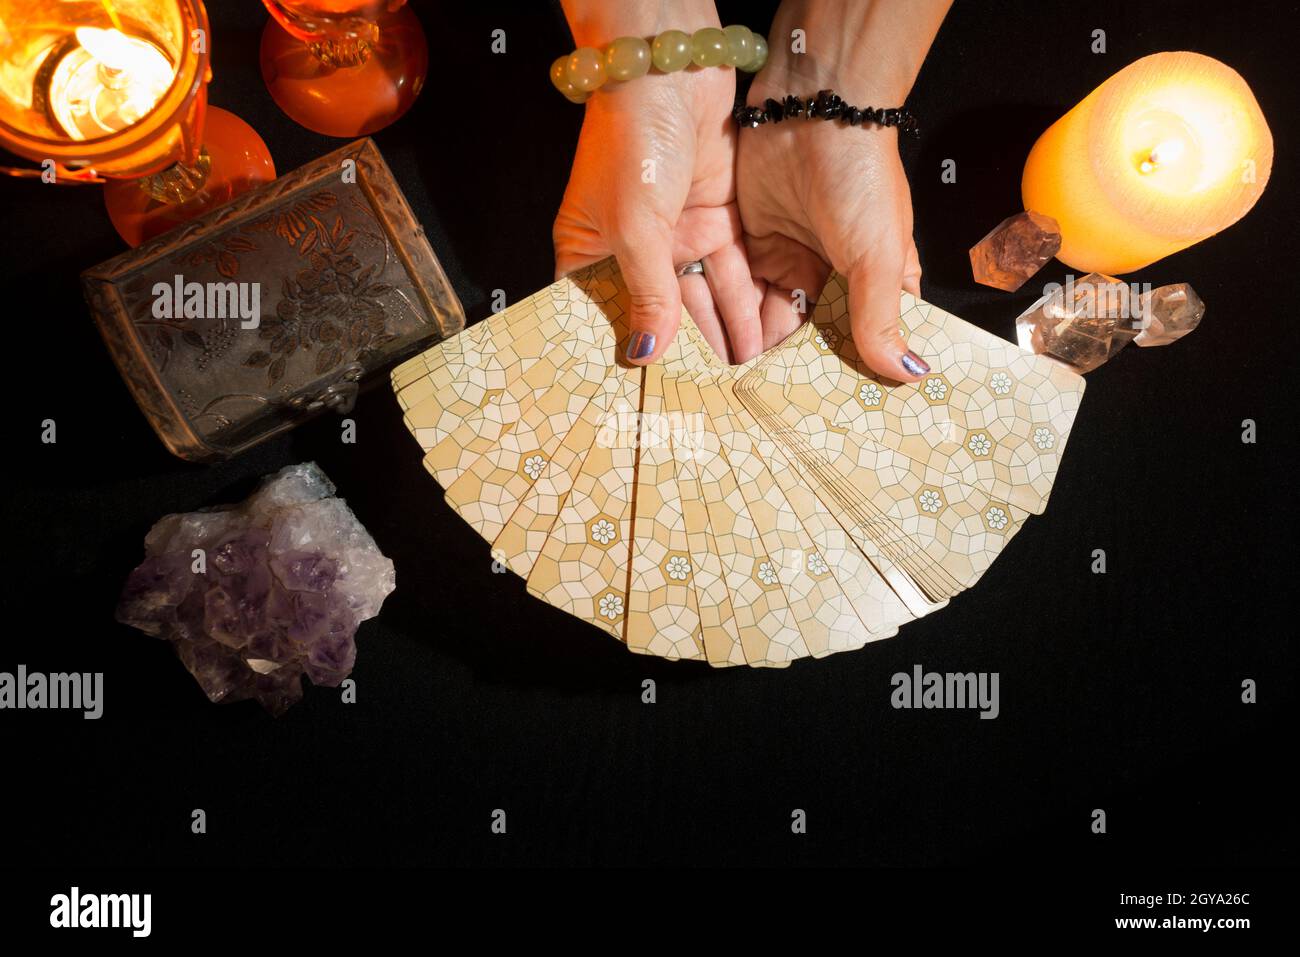 Detail of a woman's hands showing tarot cards. Concept of a fortune telling session with tarot cards. View from above. Stock Photo